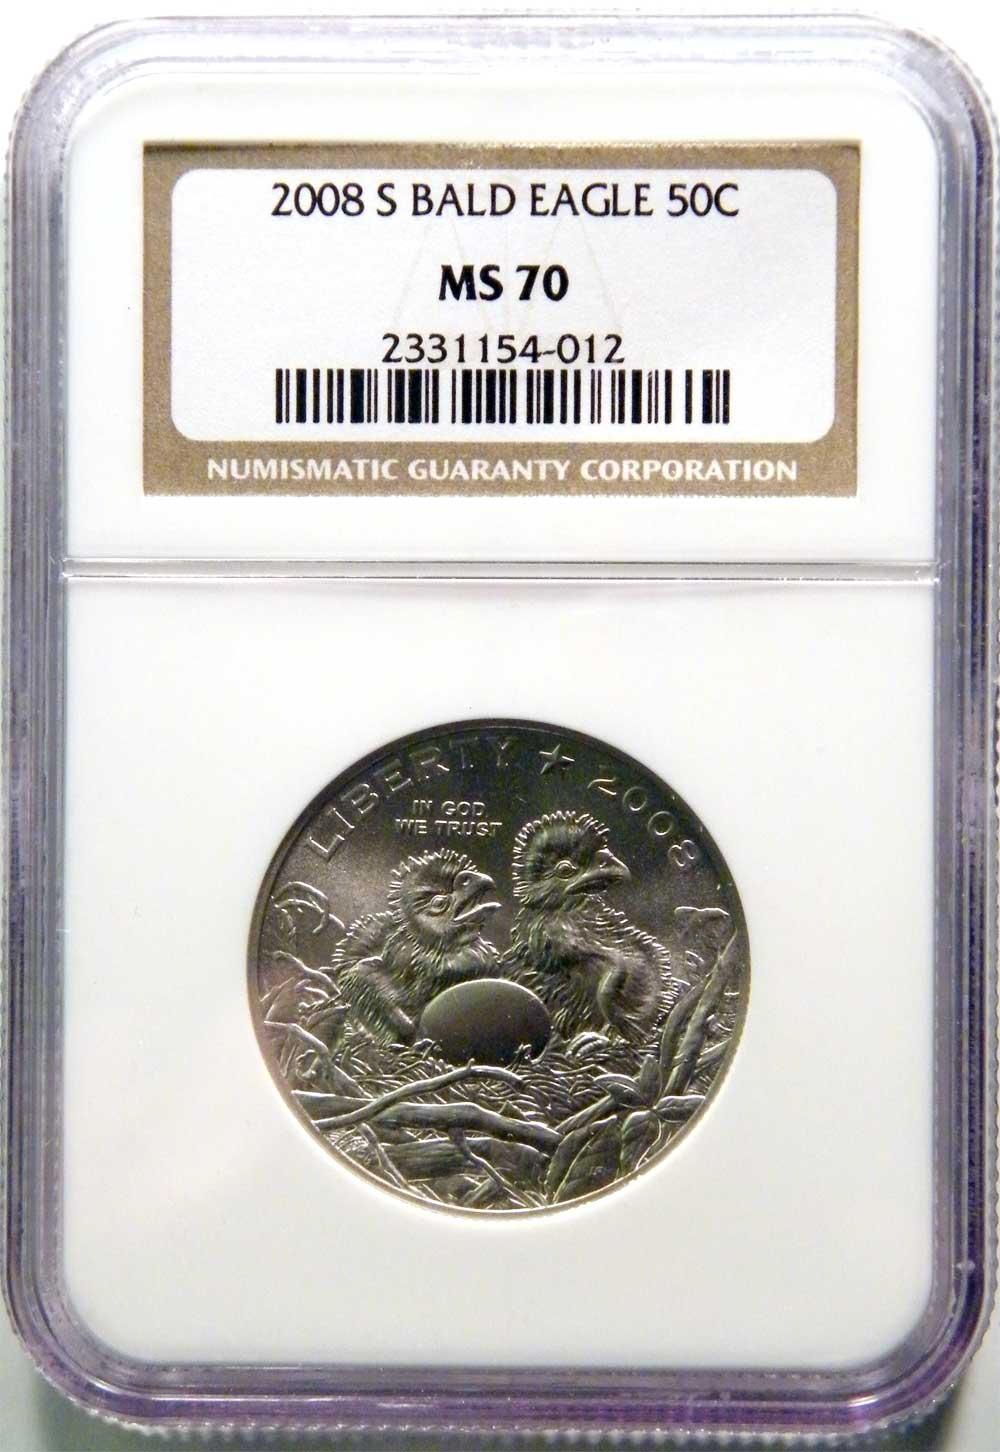 2008-S Bald Eagle Commemorative Uncirculated Half Dollar in NGC MS 70